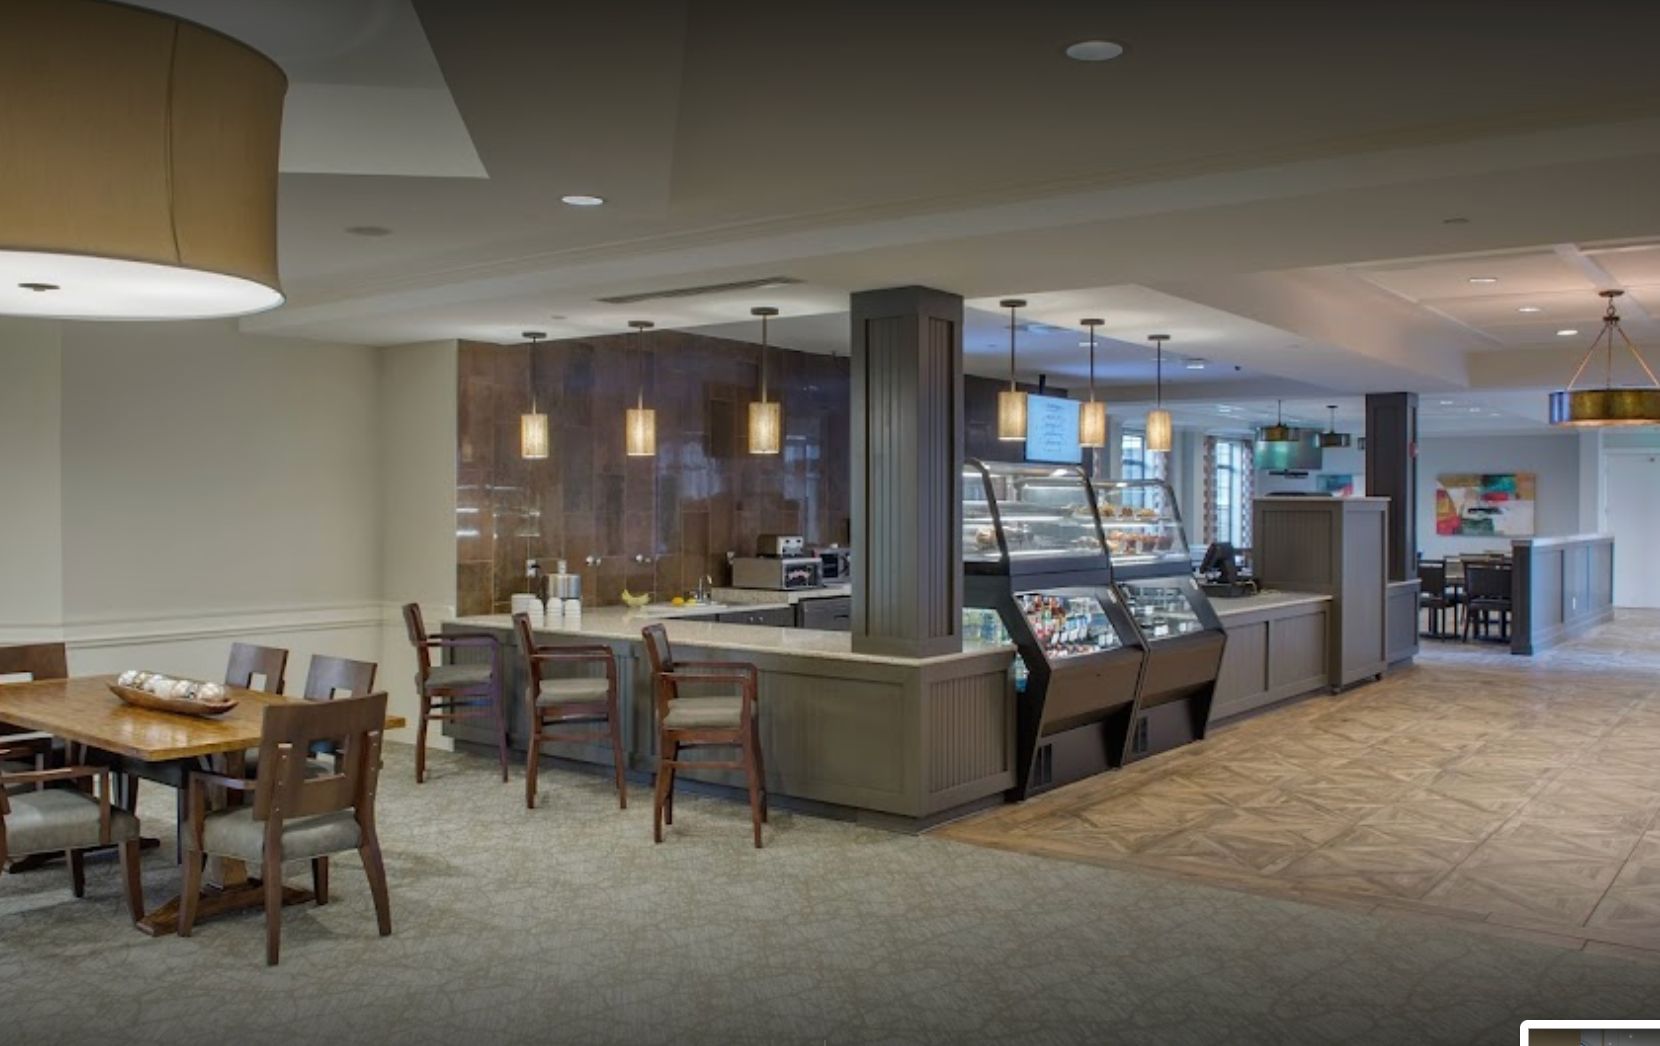 Interior view of Somerby Franklin senior living community's cafeteria with modern architecture and design.